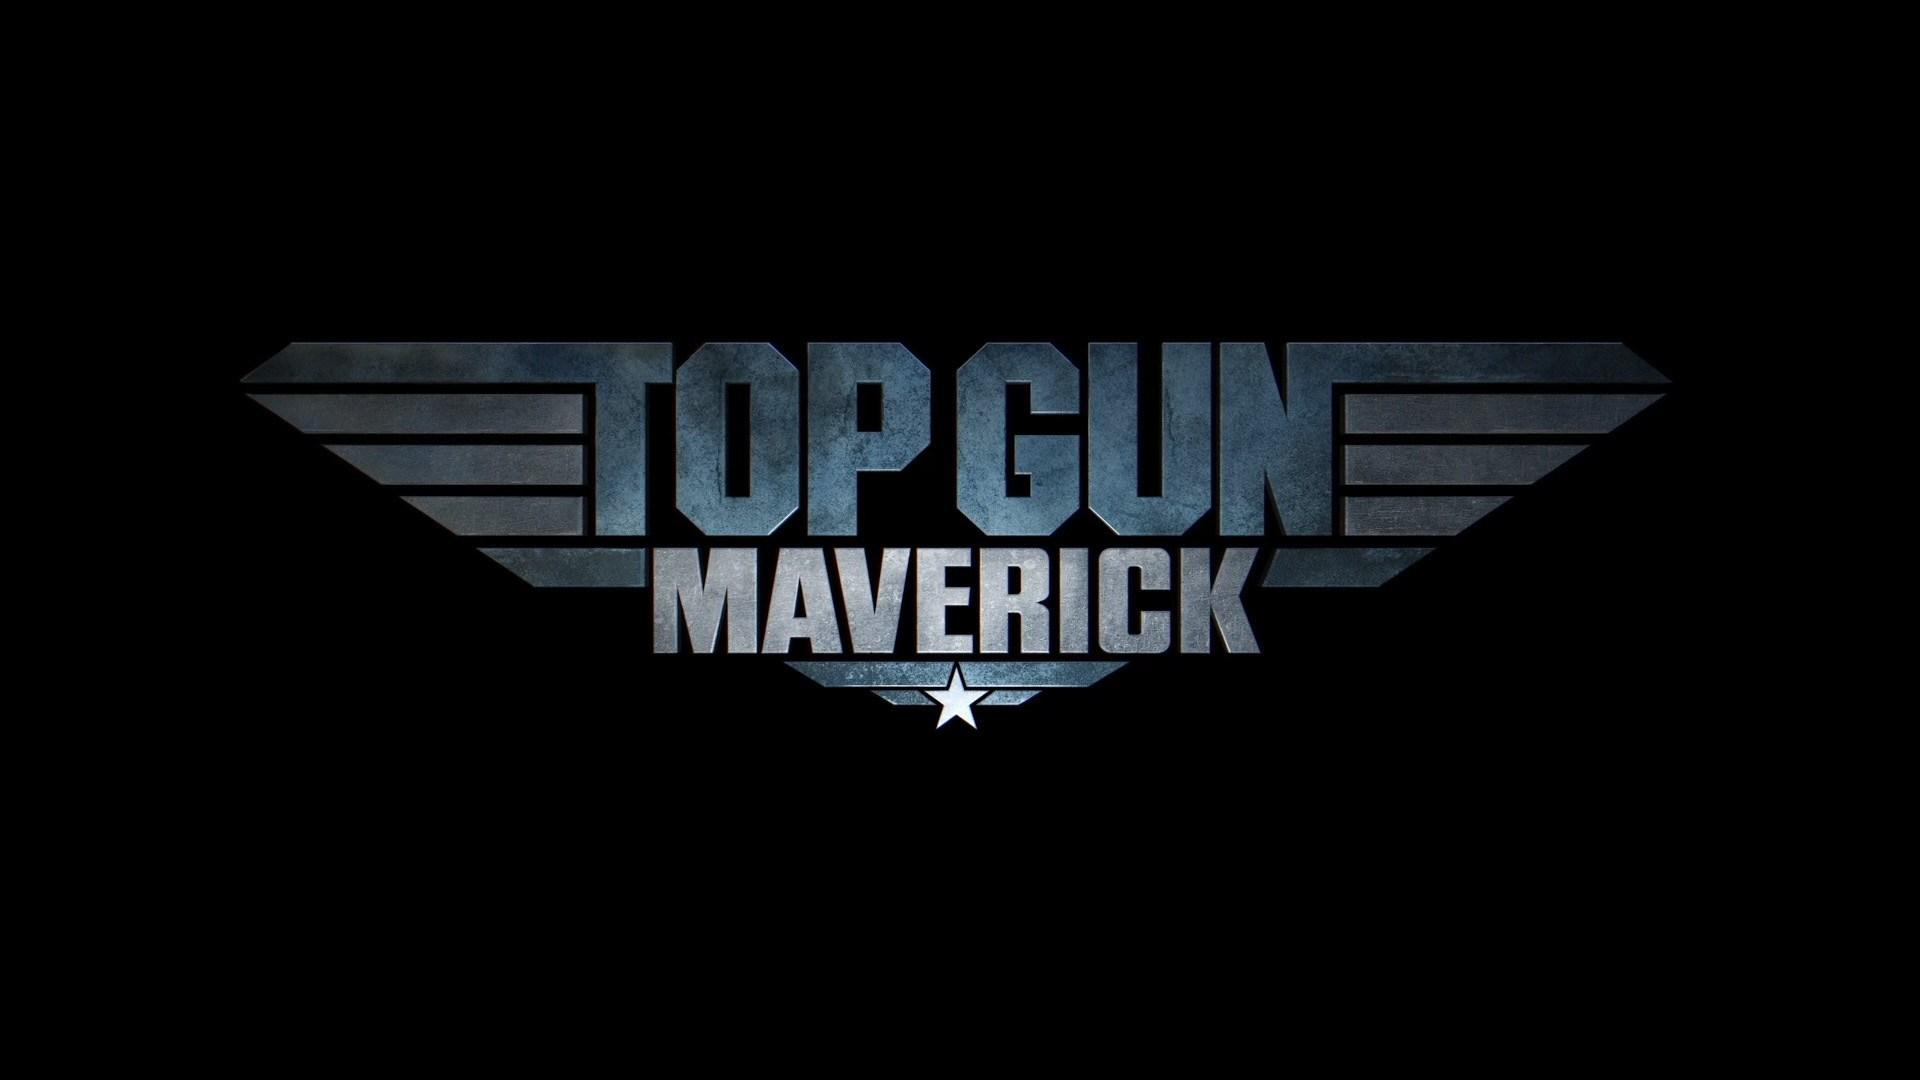 Tom Cruise returns to the skies in first teaser trailer for 'Top Gun